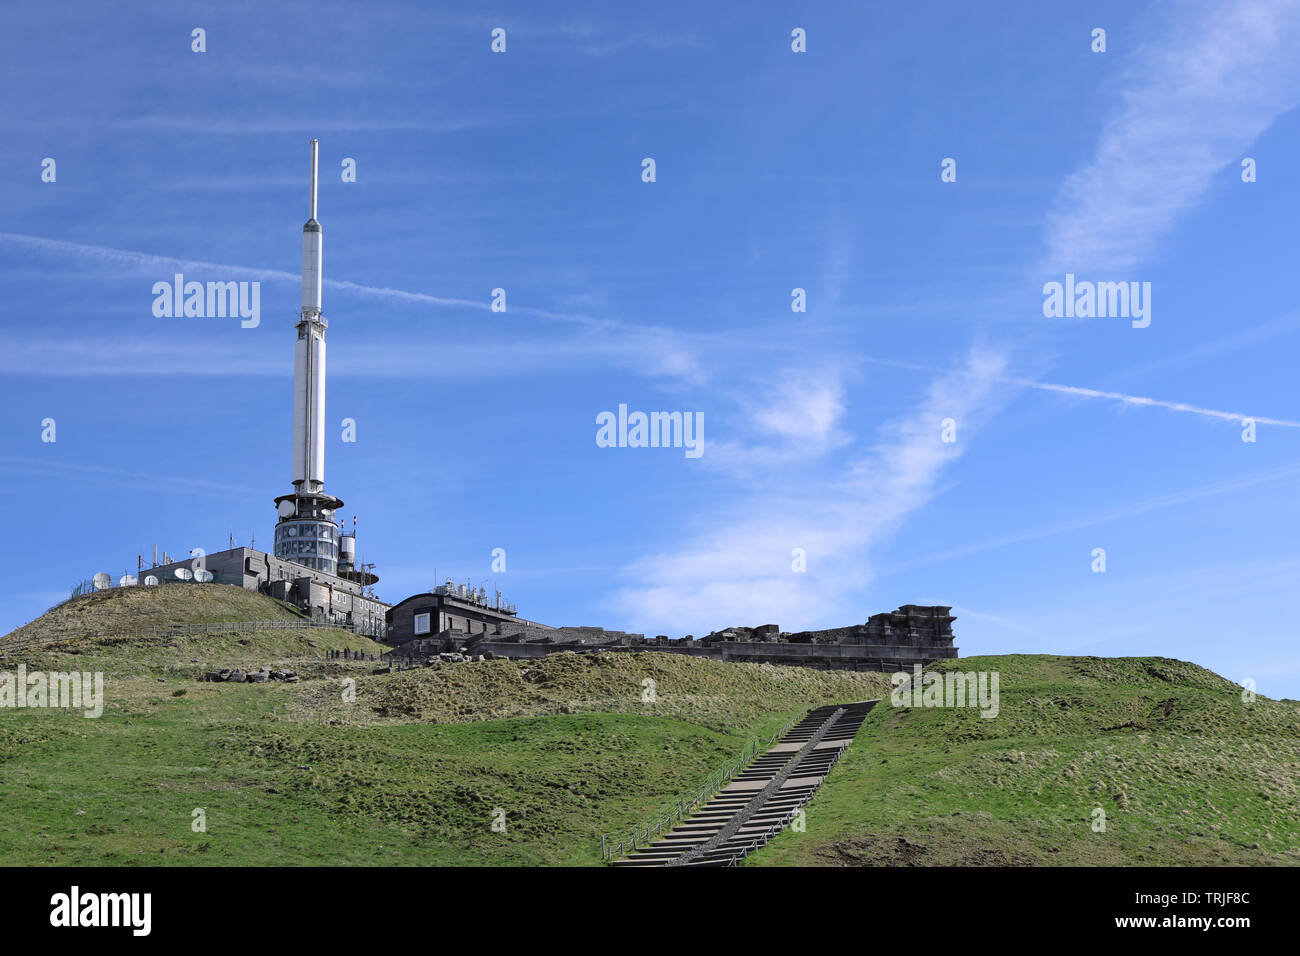 the puy de dome volcano summit. Auvergne, France, Europe Stock Photo